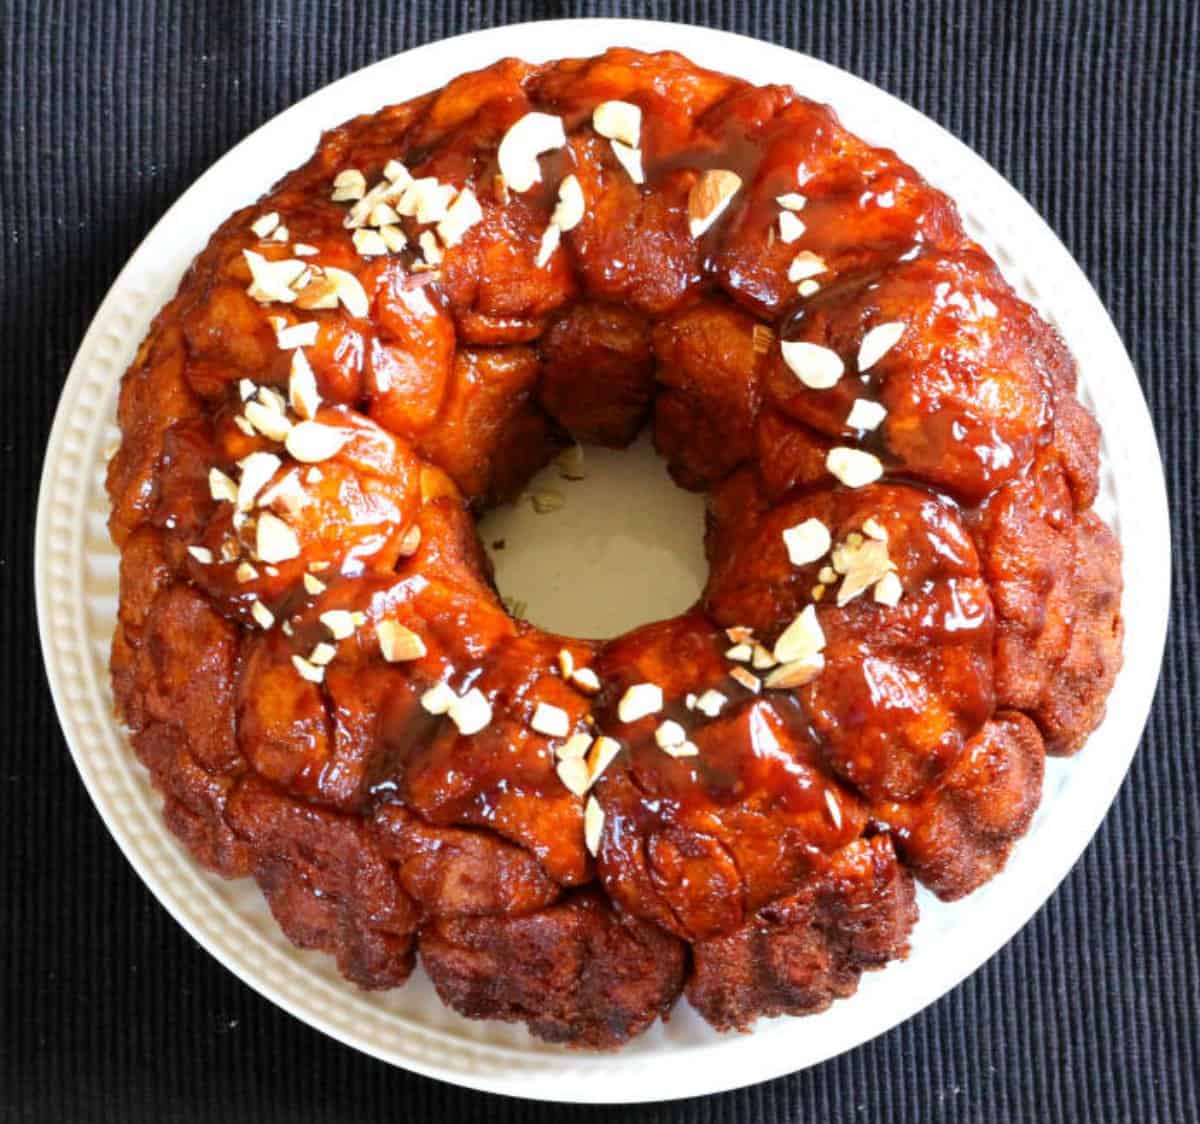 Easy and Quick Classic Pull-apart Monkey bread served on a white ceramic plate.